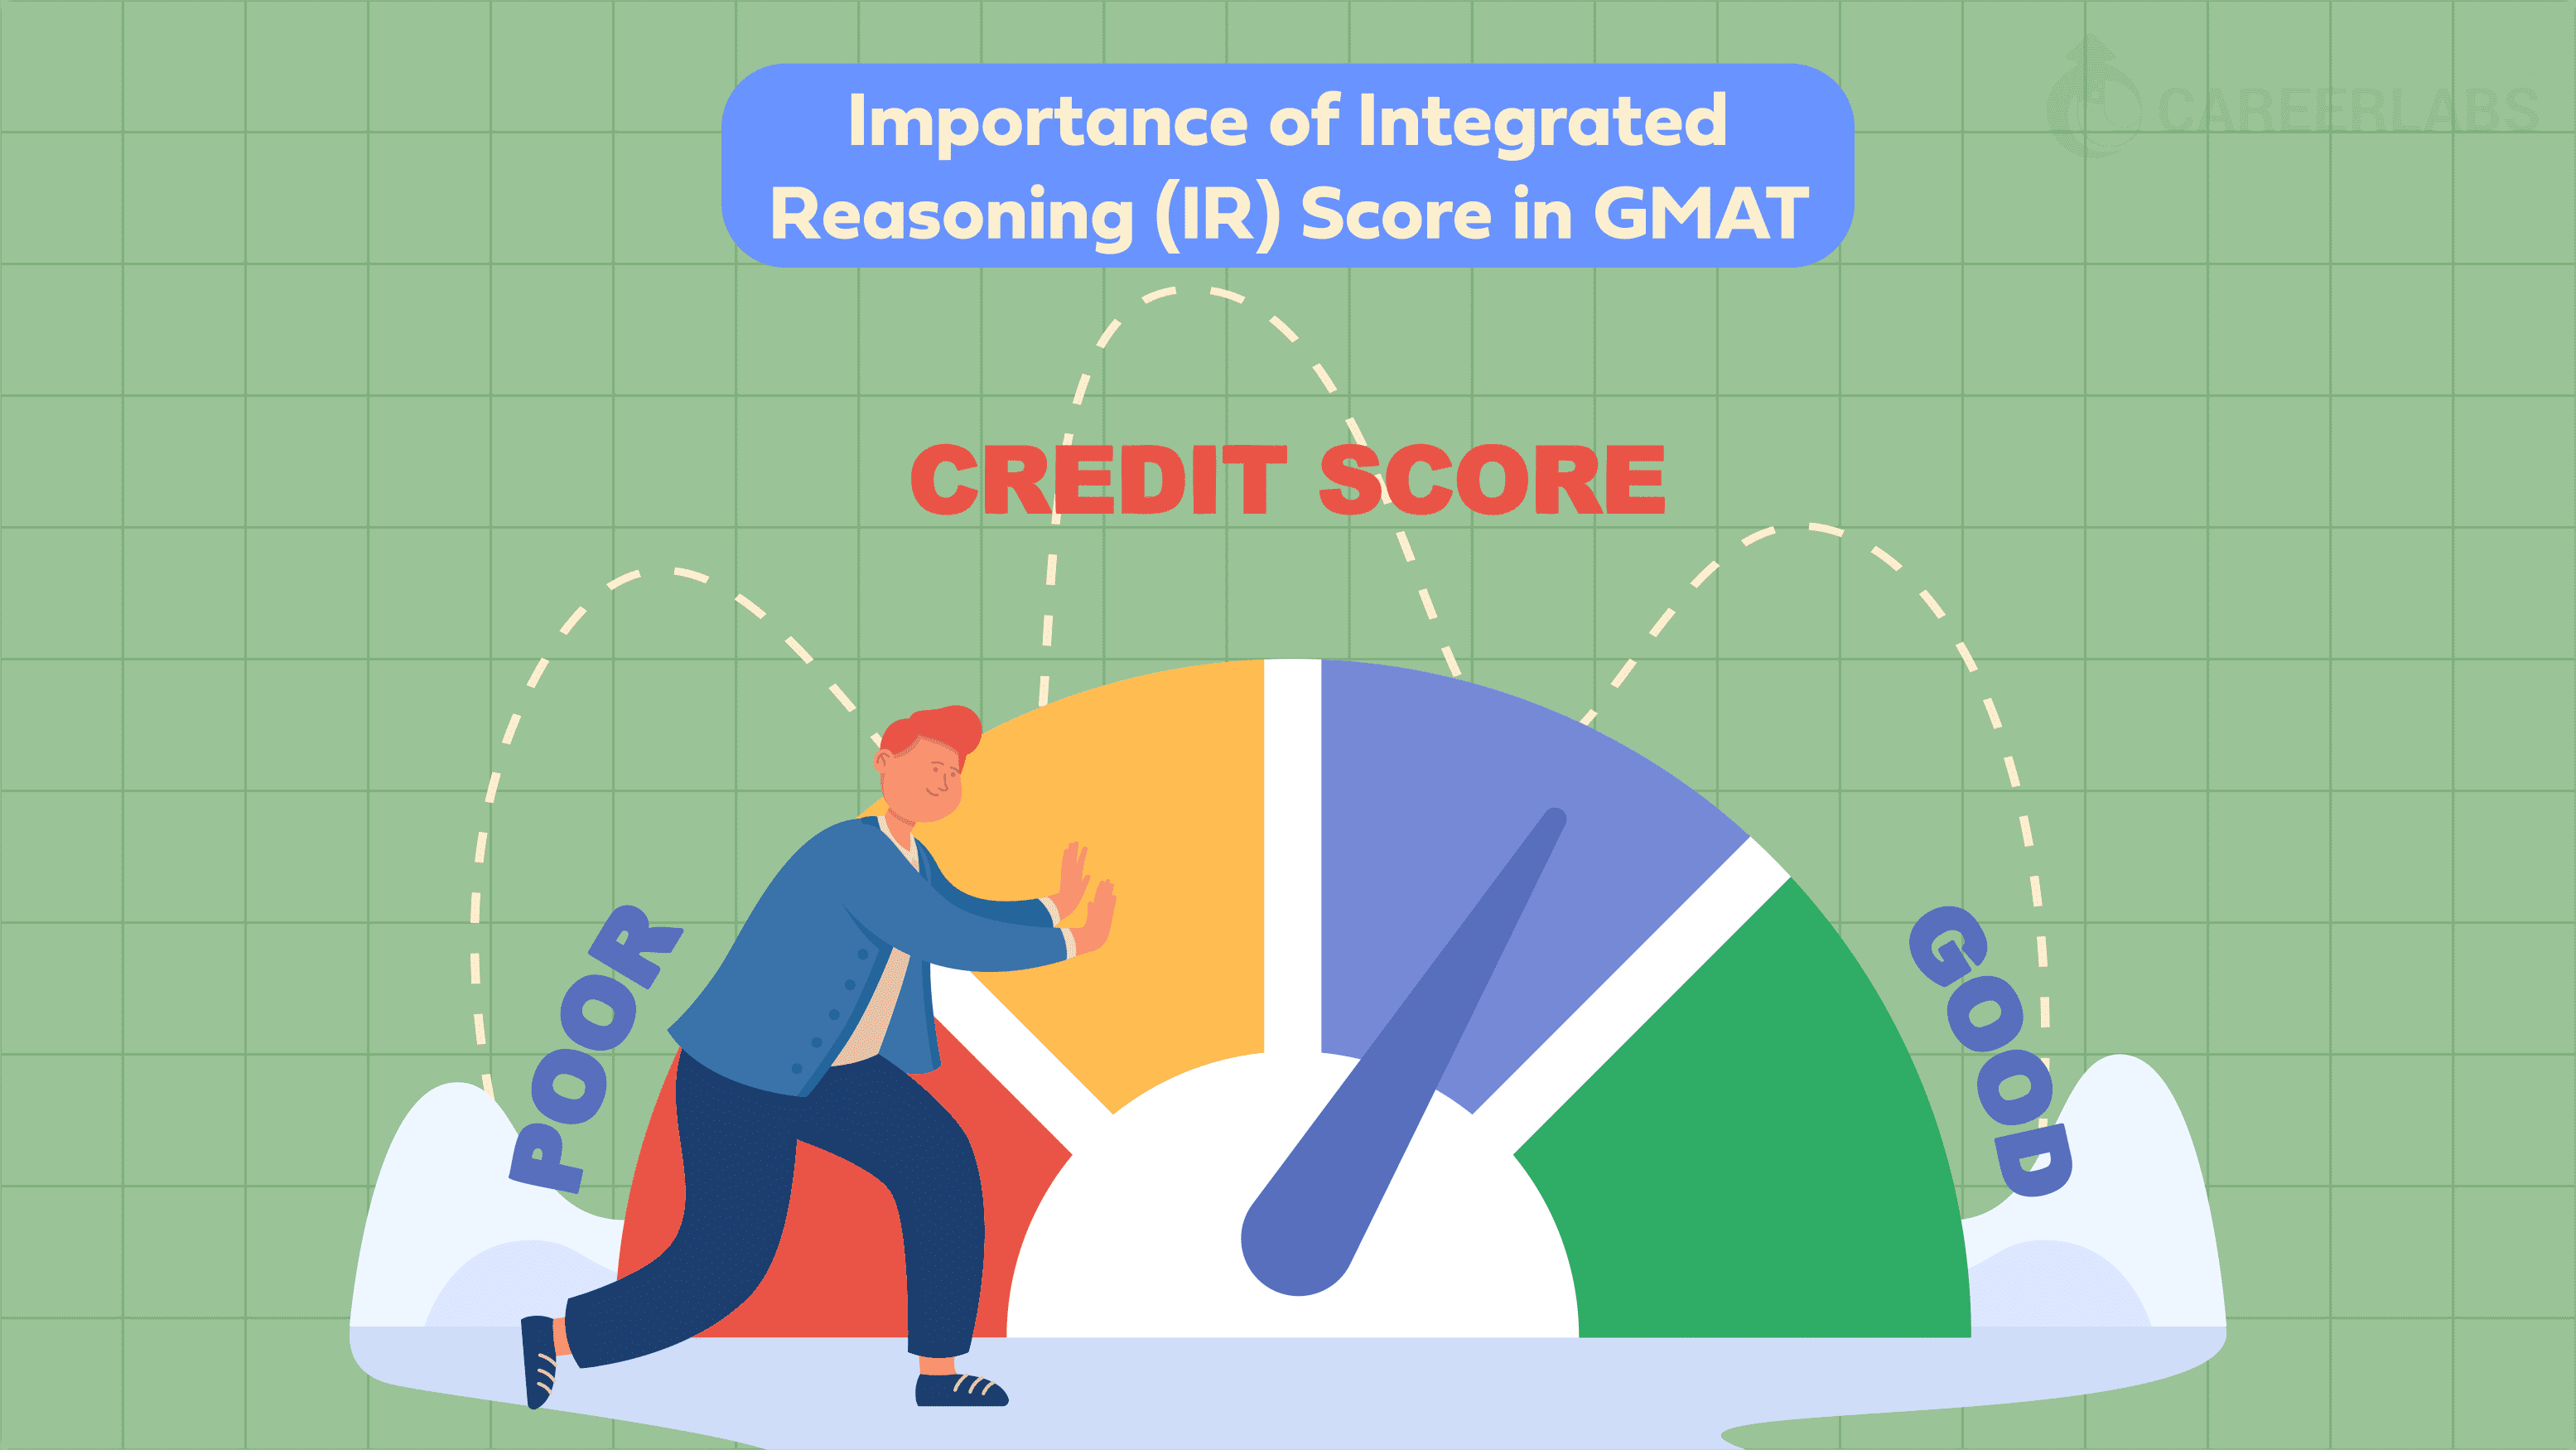 Importance of Integrated Reasoning (IR) Score in GMAT